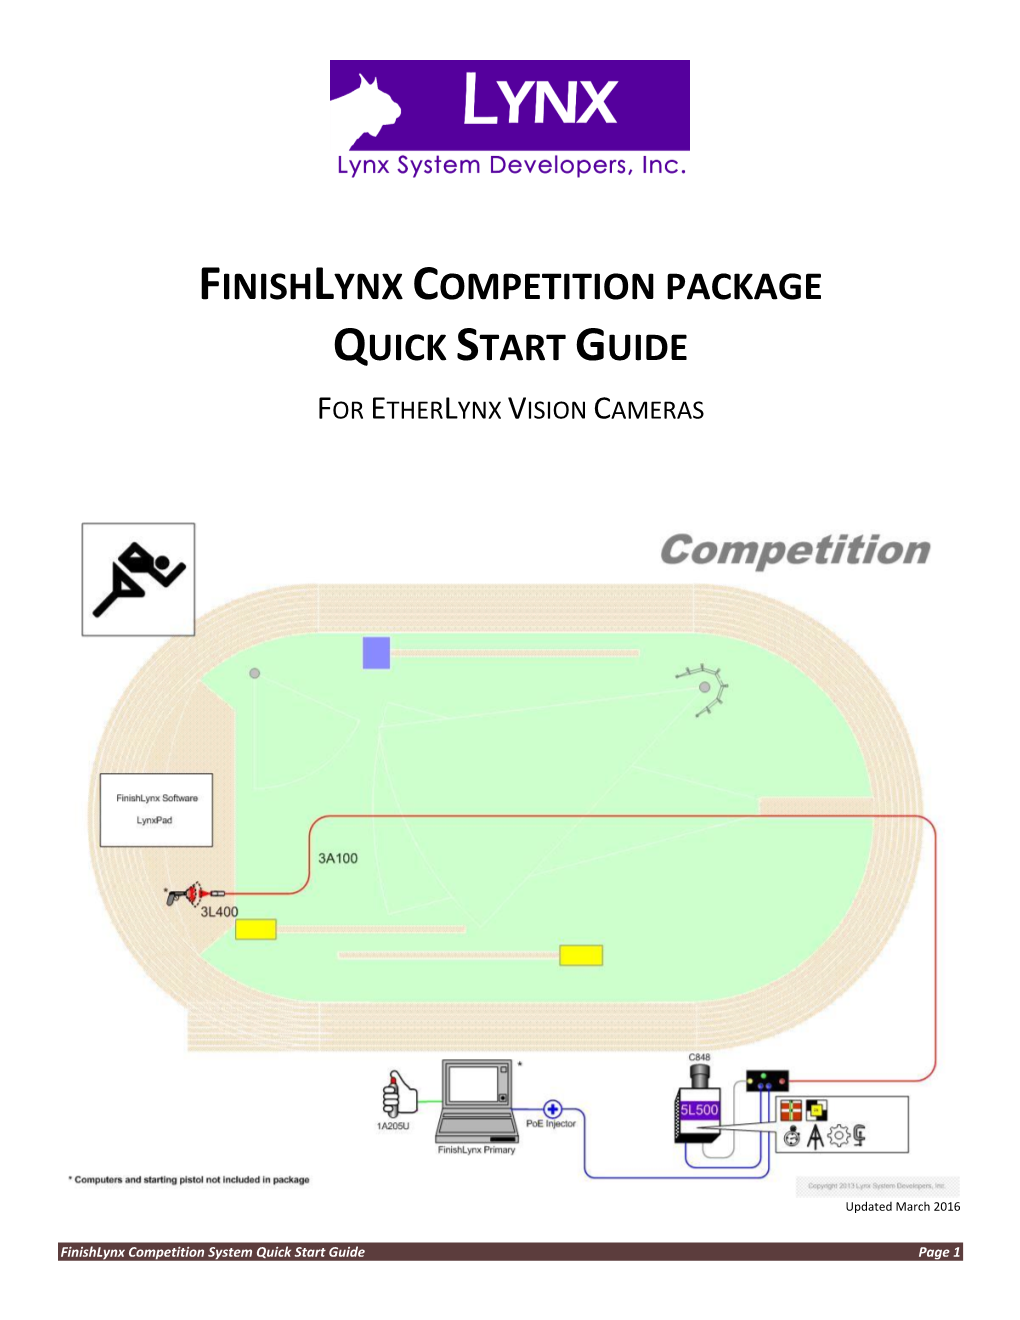 Finishlynx Competition Package Quick Start Guide for Etherlynx Vision Cameras